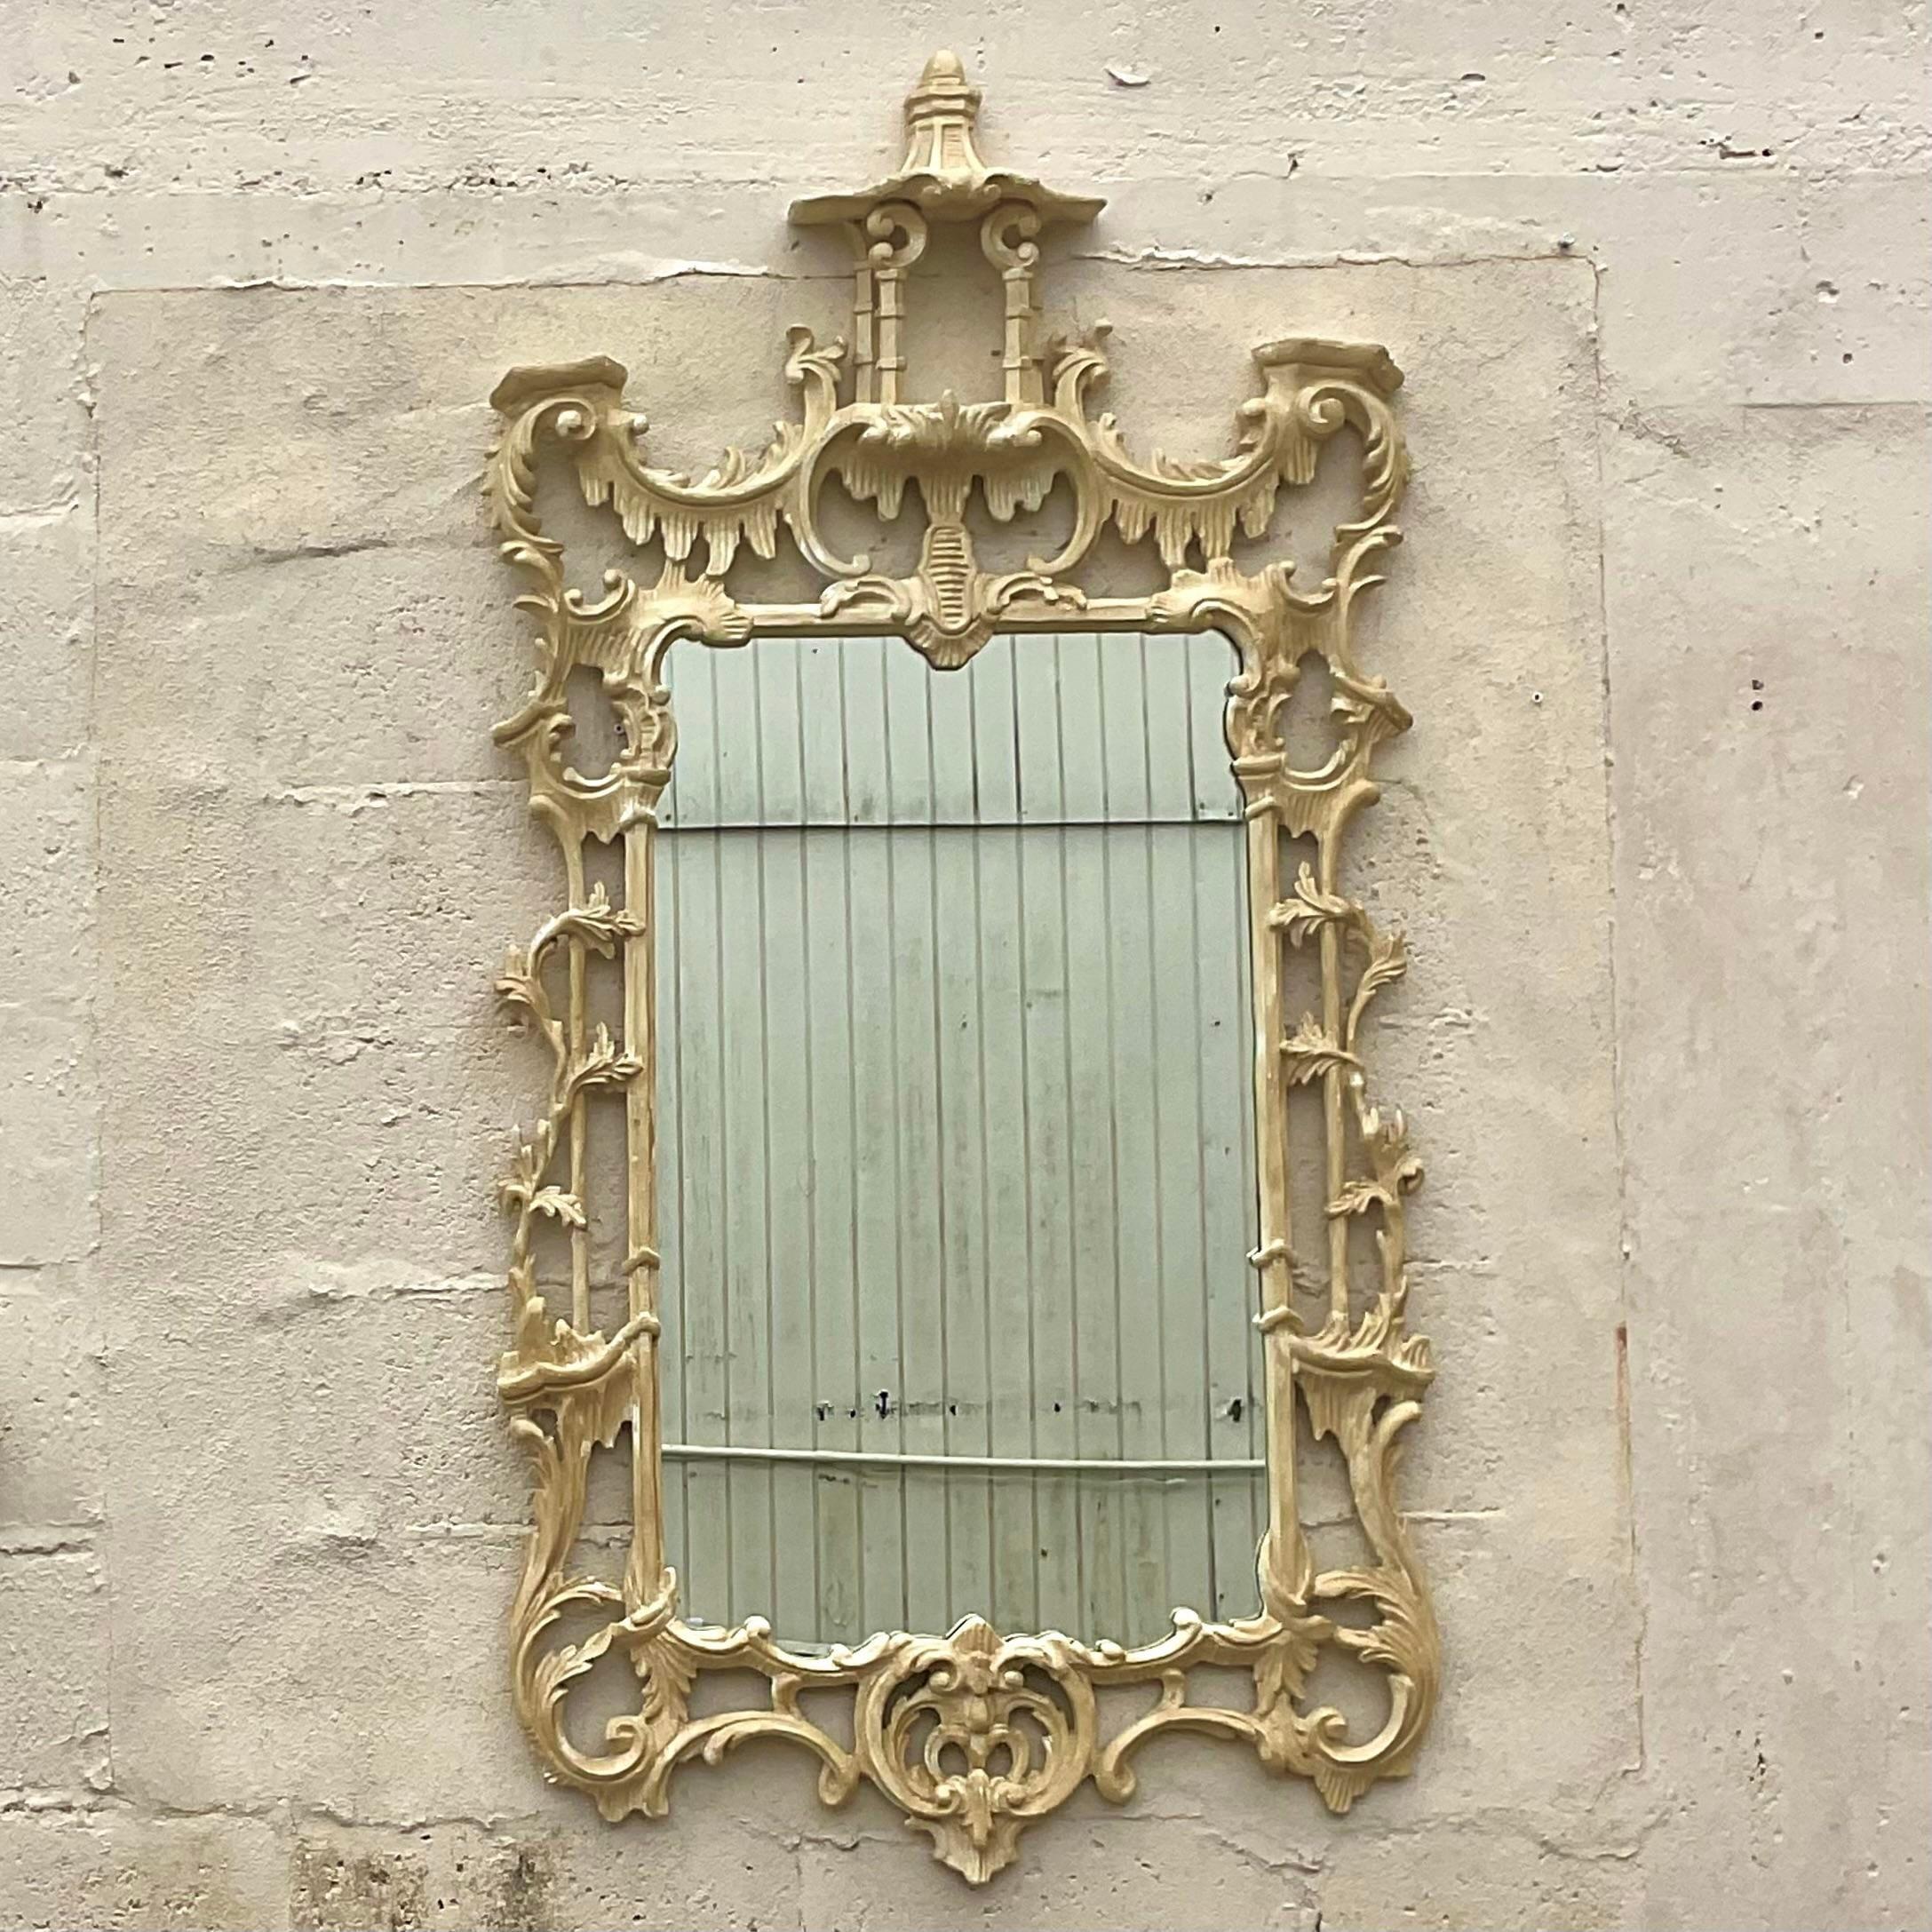 A fabulous vintage Regency Pagoda mirror. Beautiful hand carved wood detail in a cerused finish. Gorgeous Pagoda roofline on top. Acquired from a Palm Beach estate.